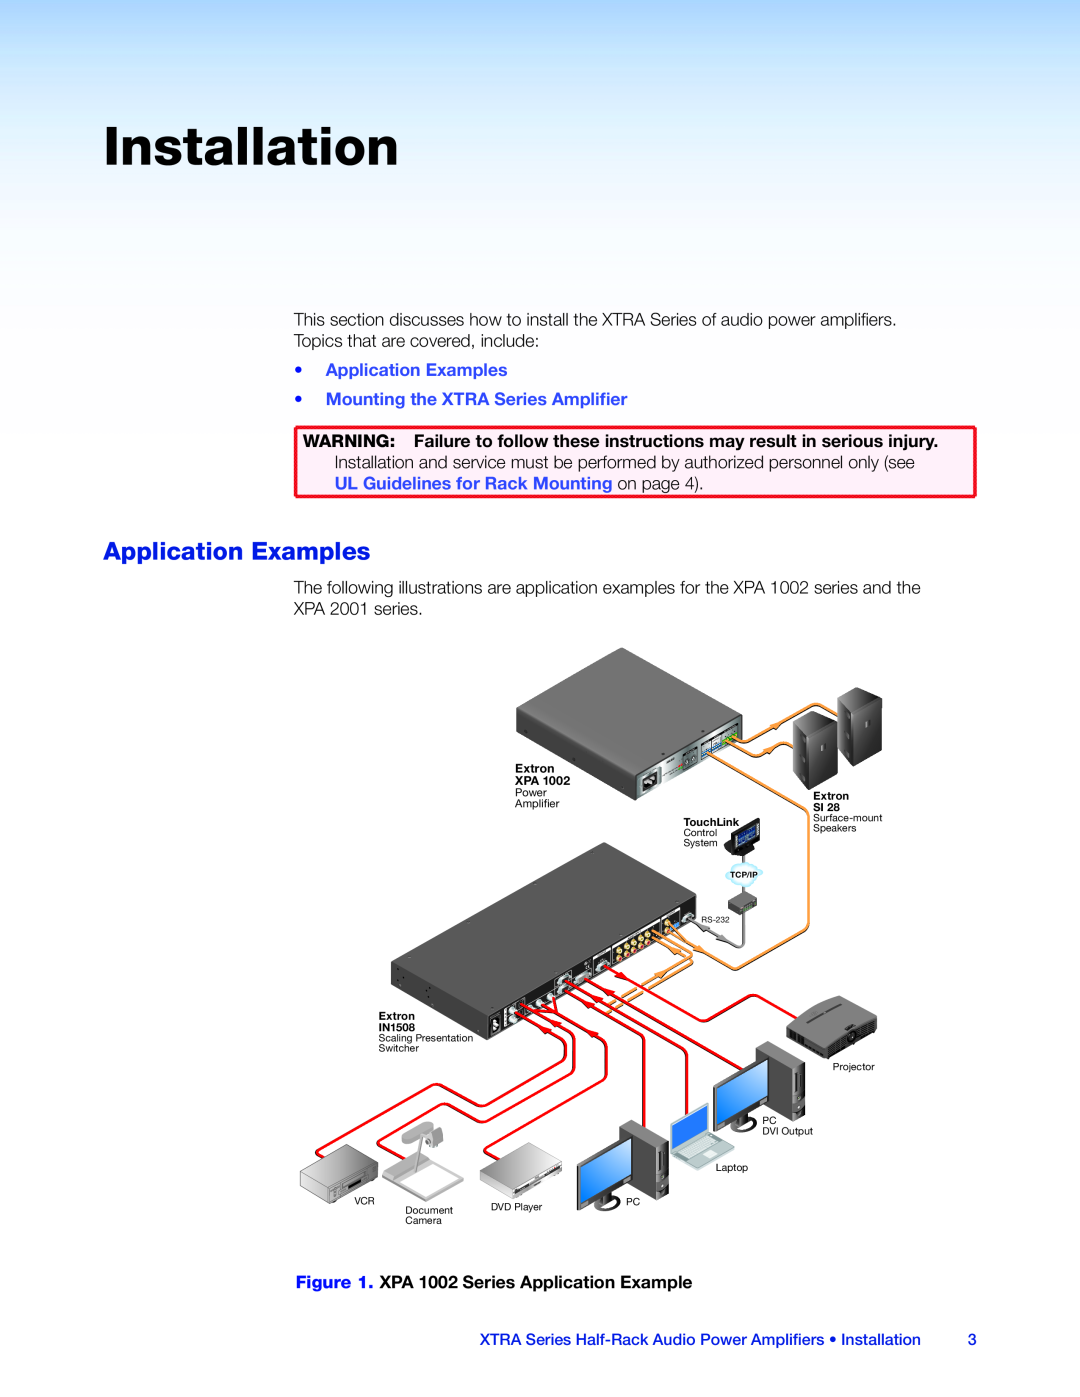 Extron electronic XTRA SERIES manual Installation, Application Examples 